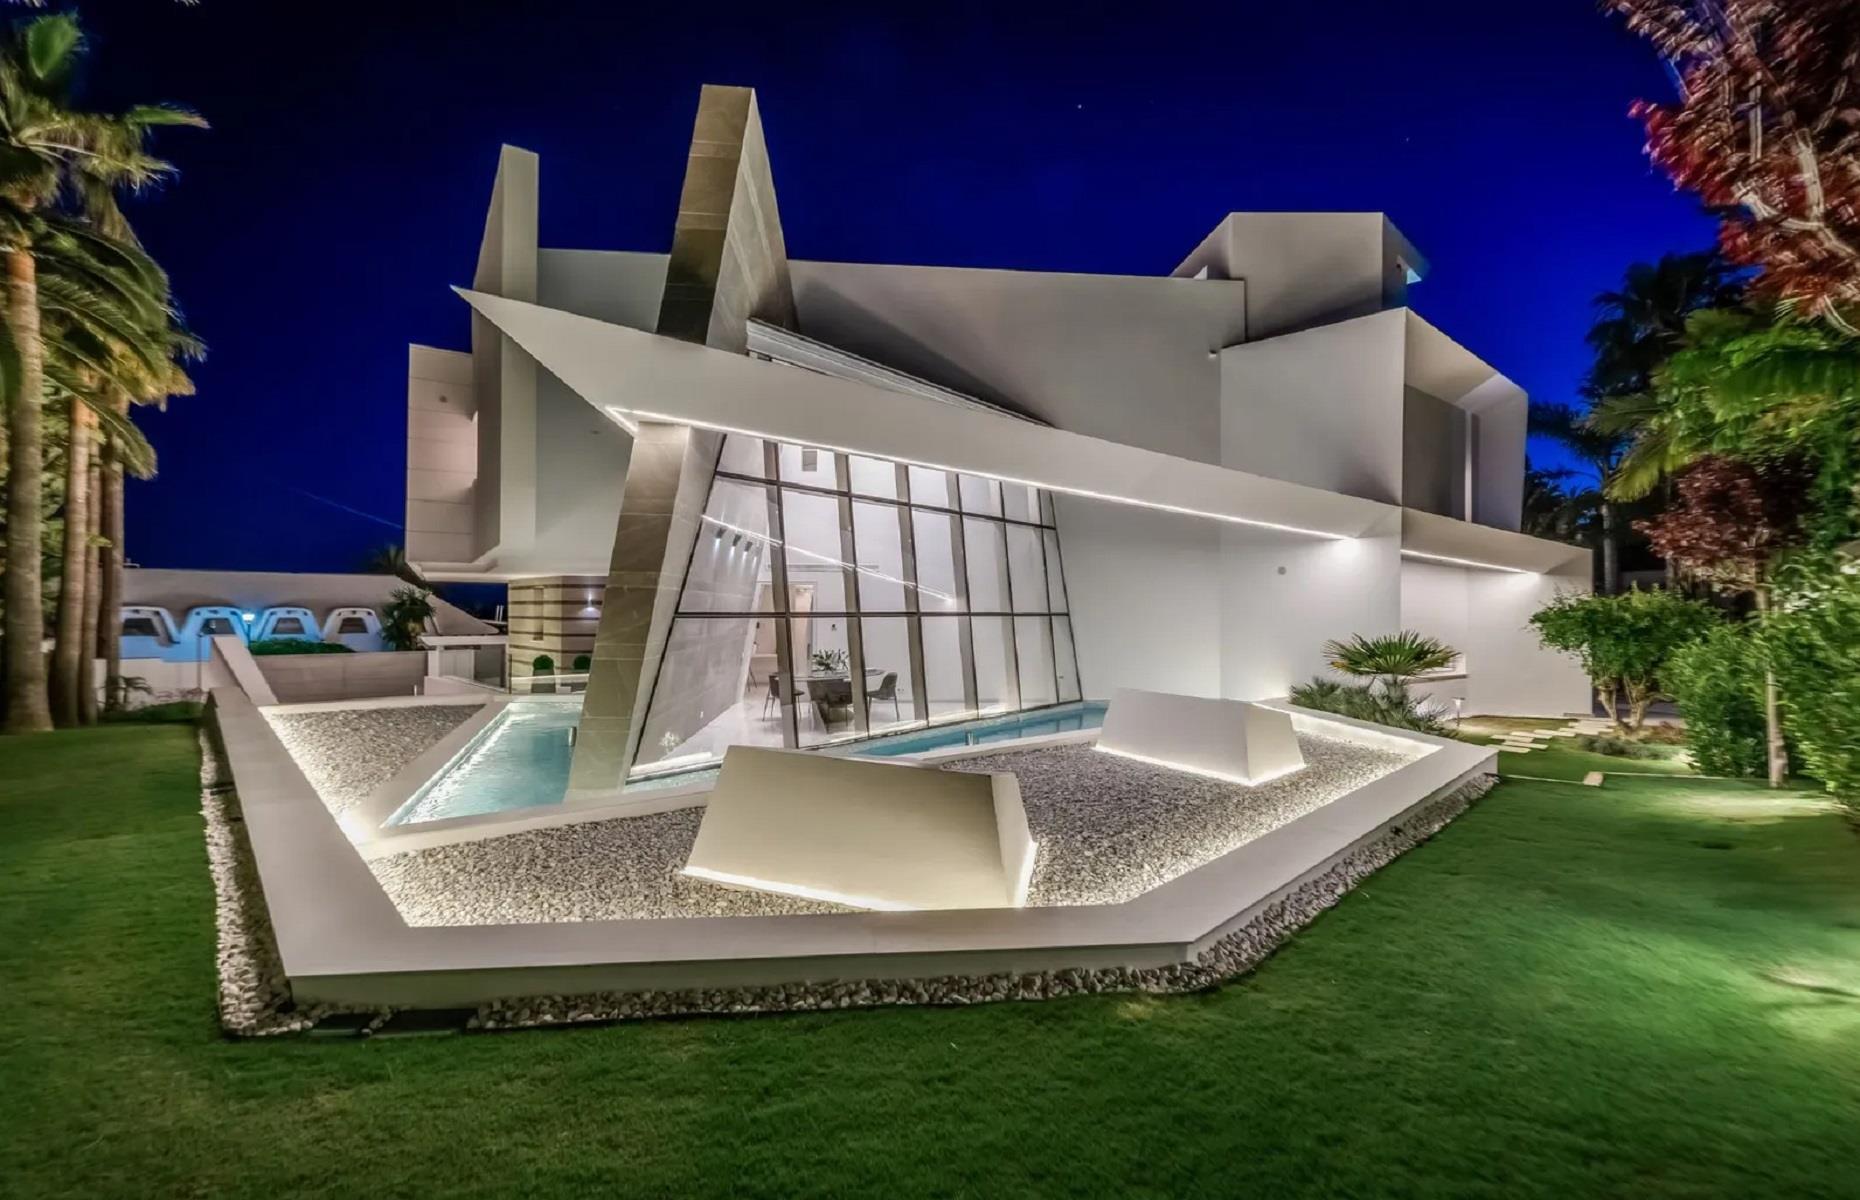 <p>With their clean lines, bold cantilevers, walls of glass and jaw-dropping interior design, these dreamy modern homes offer both style and substance.</p>  <p>From a German villa shaped like a spacecraft to a brand-new mega-mansion overlooking the Sunset Strip, these are the world's most spectacular contemporary cribs.</p>  <p><strong>Click or scroll on to become green with envy... </strong></p>  <p>All dollar values in US dollars unless otherwise stated.</p>